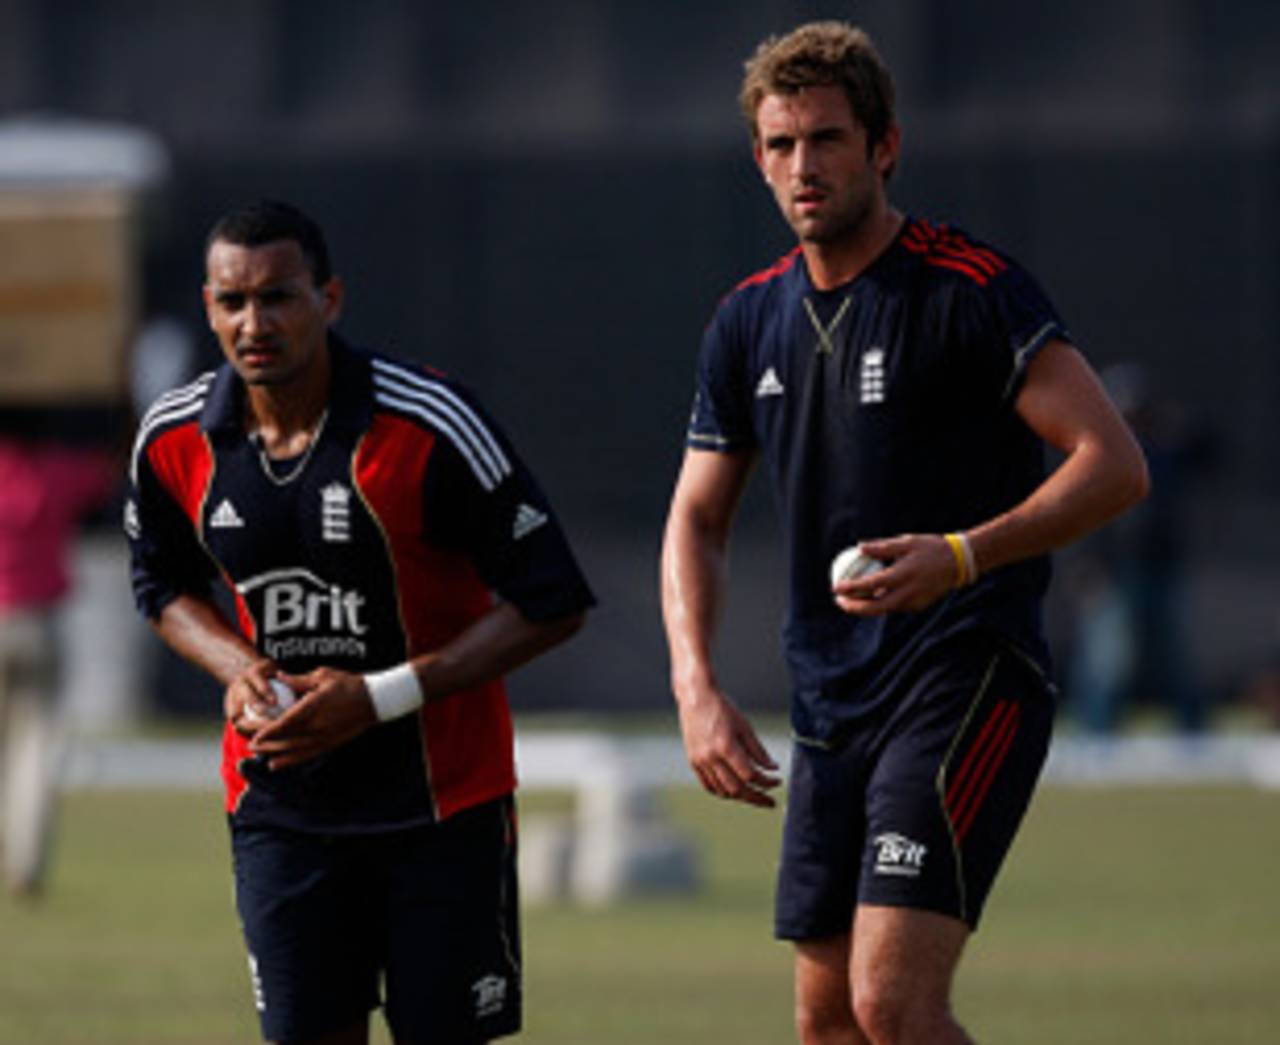 Ajmal Shahzad and Liam Plunkett could both play in the Test series after England's injury crisis hit&nbsp;&nbsp;&bull;&nbsp;&nbsp;Getty Images